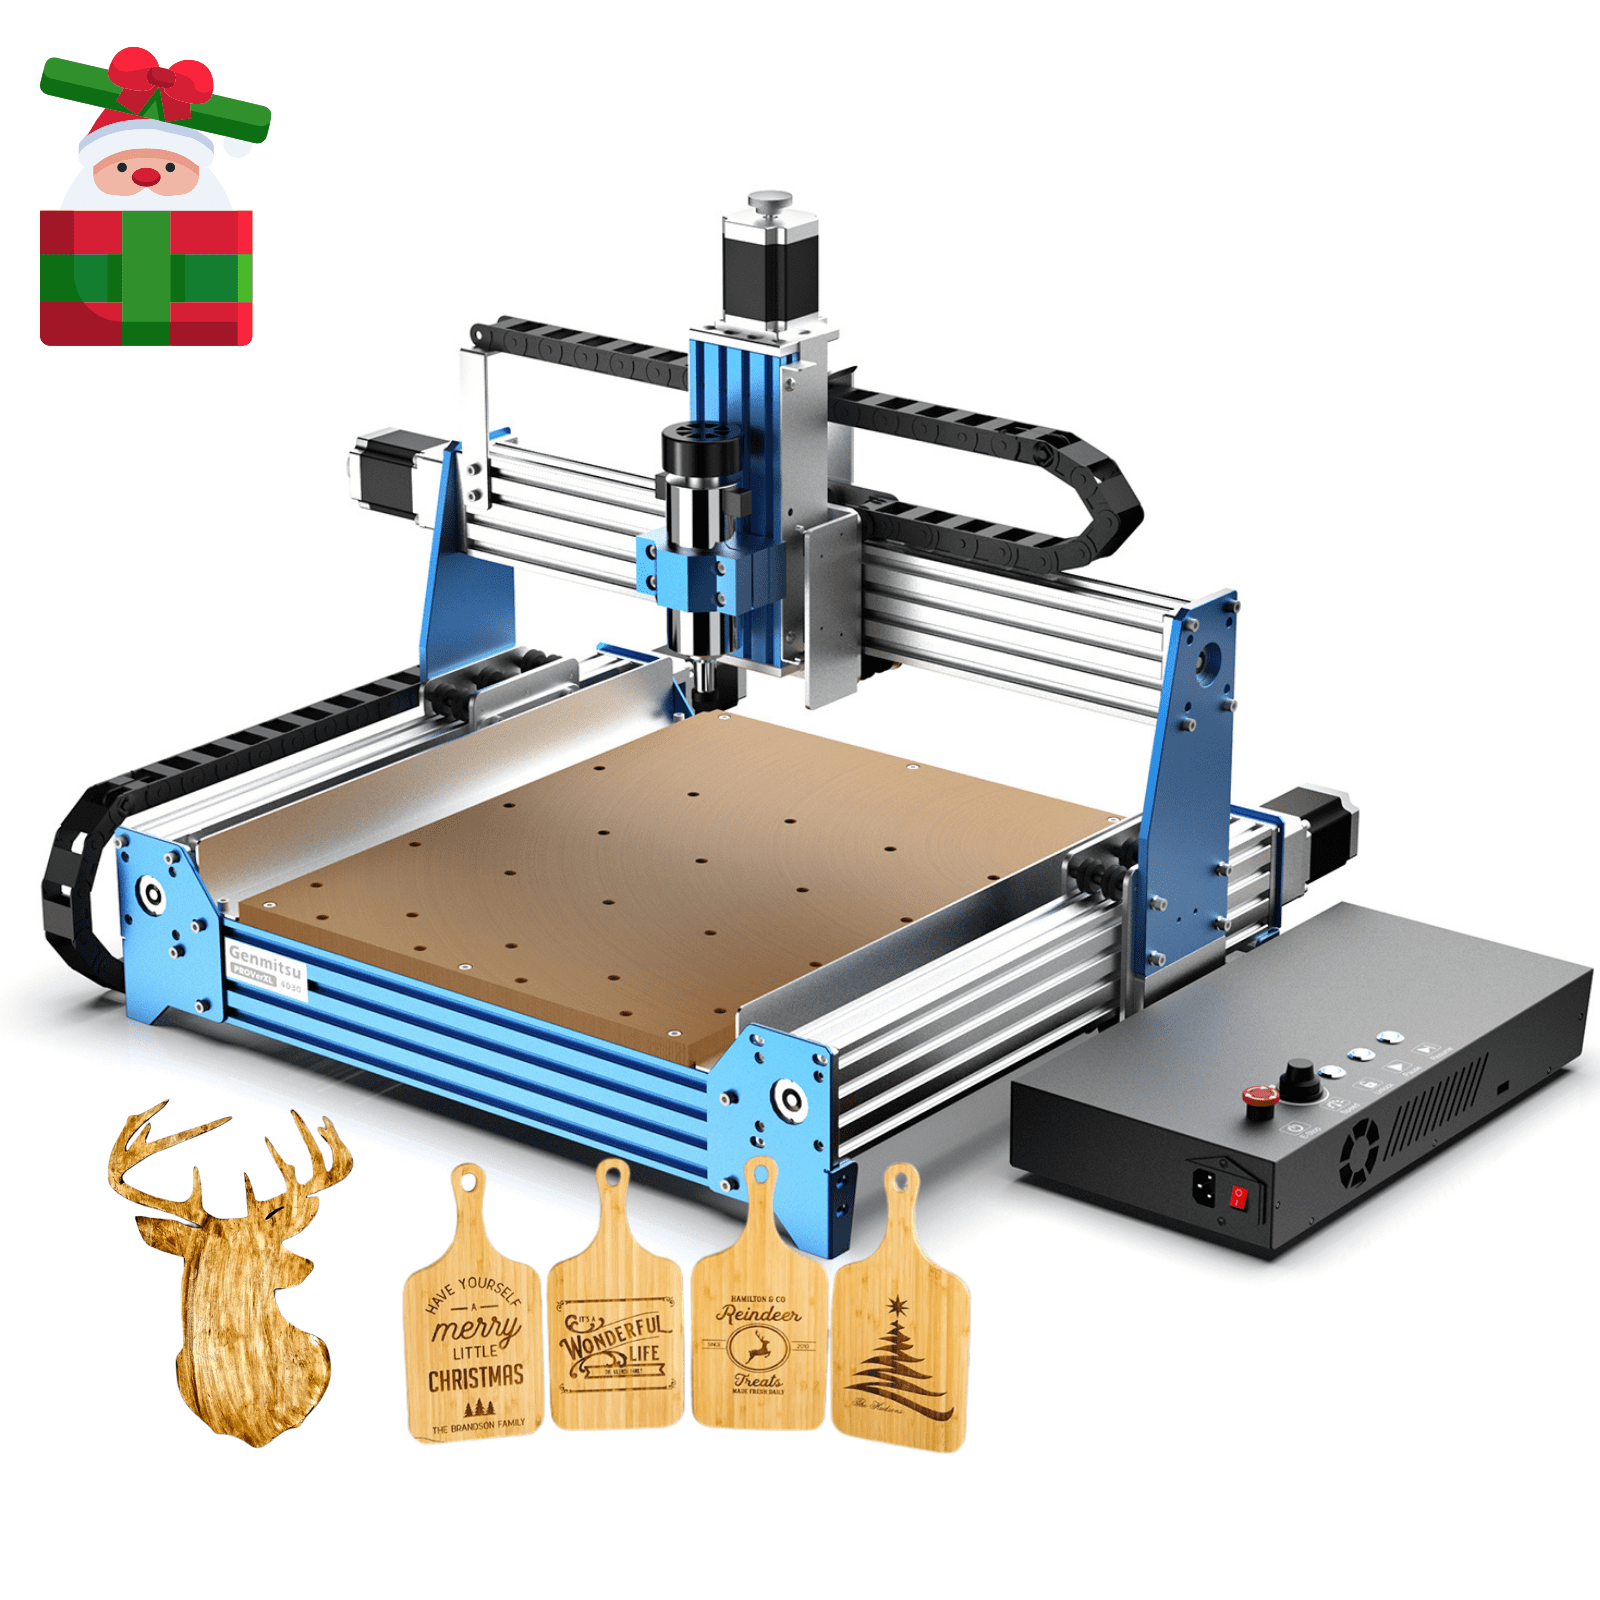 XYZ Working Area 160x100x45mm CNC Router Machine By Beauty Star DIY CNC Router Kits 1610 GRBL Control 3 Axis Plastic Acrylic PCB PVC Wood Carving Milling Engraving Machine